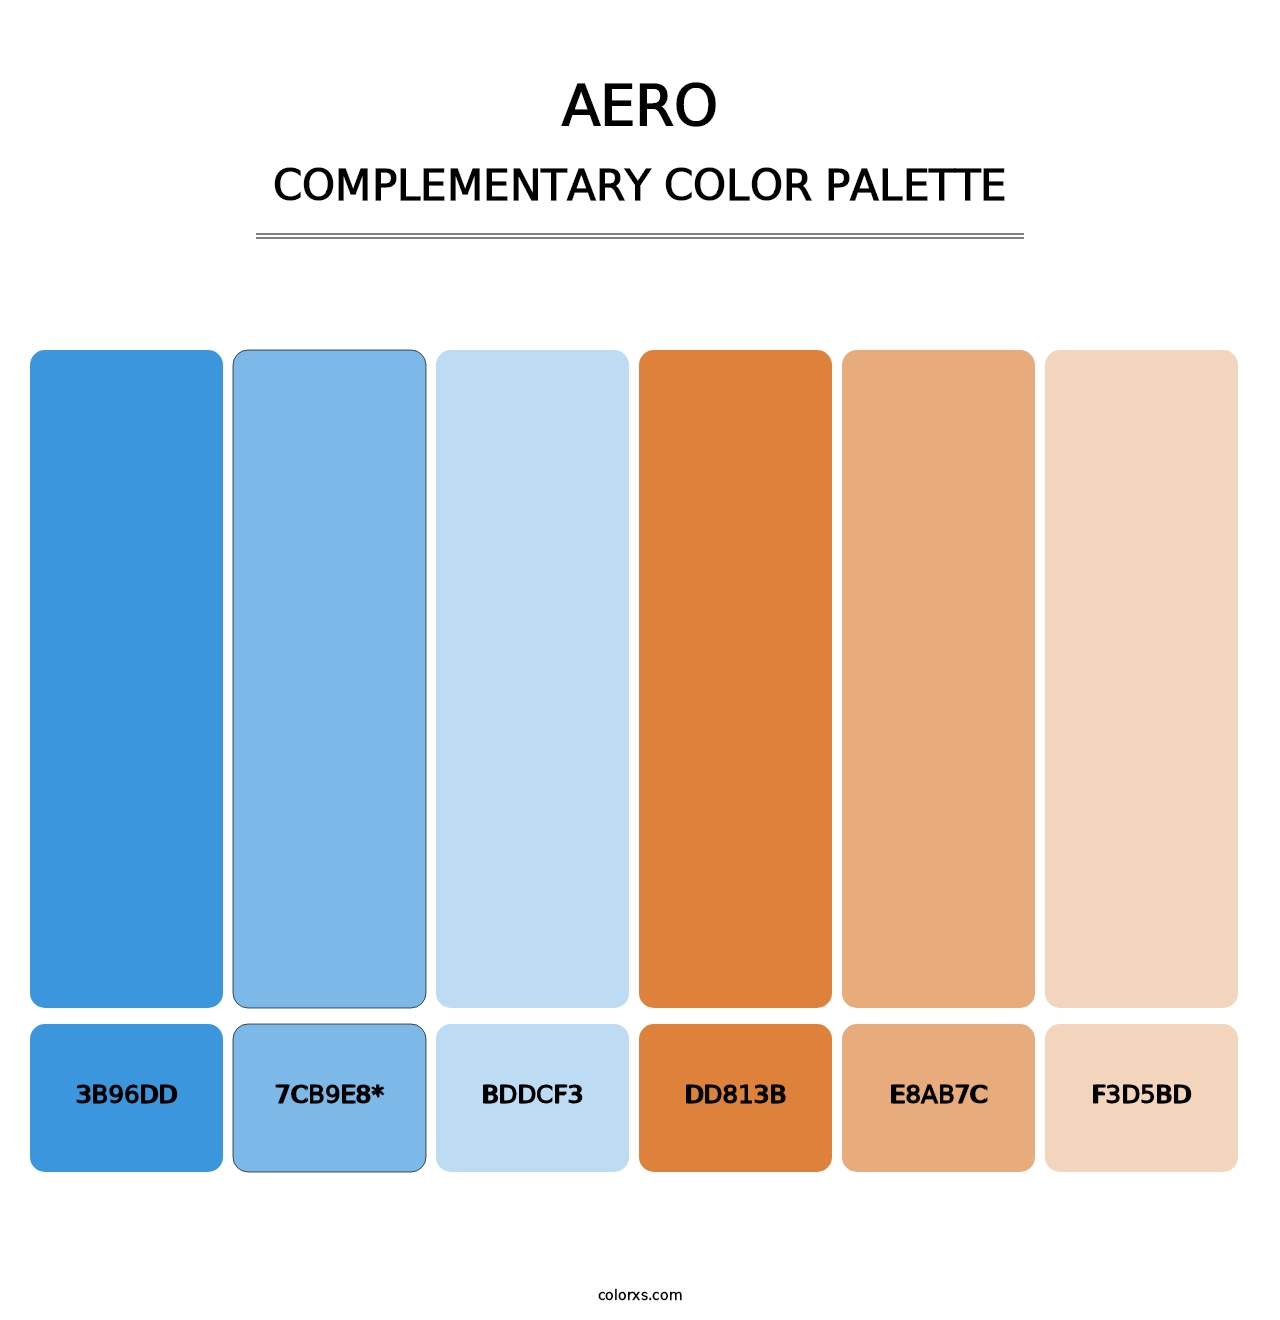 Aero - Complementary Color Palette